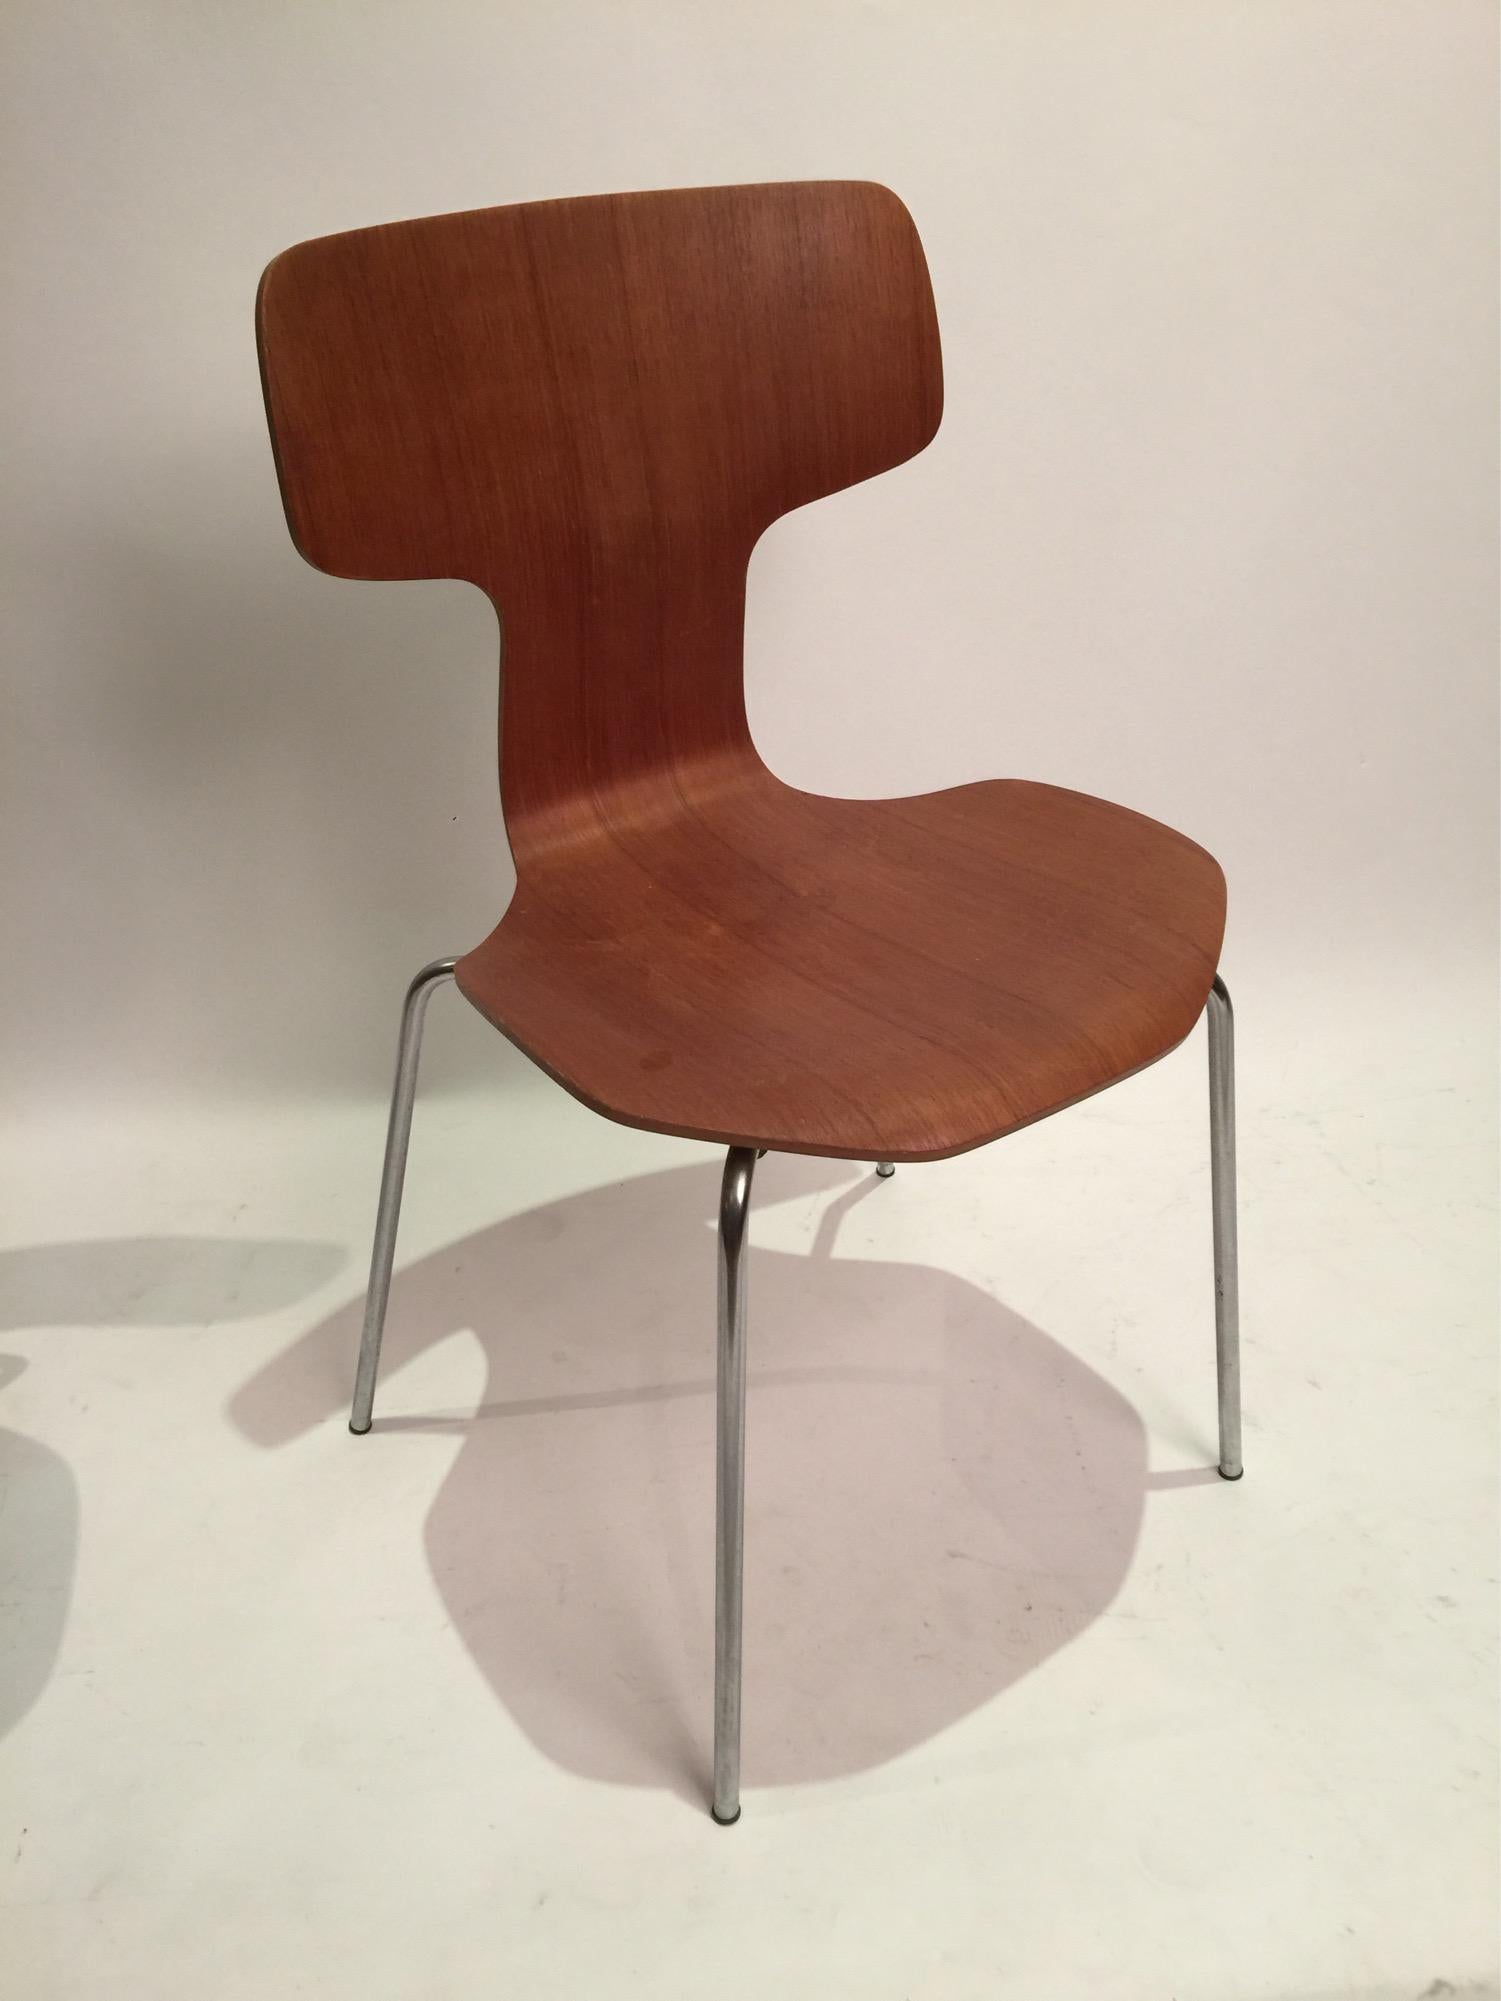 Teak plywood chairs designed by Arne Jacobsen and executed by Fritz Hansen Denmark. The 3103 chair, no longer in production, shares a design platform with the more common Series 7 as well as the Grand Prix chairs.
    